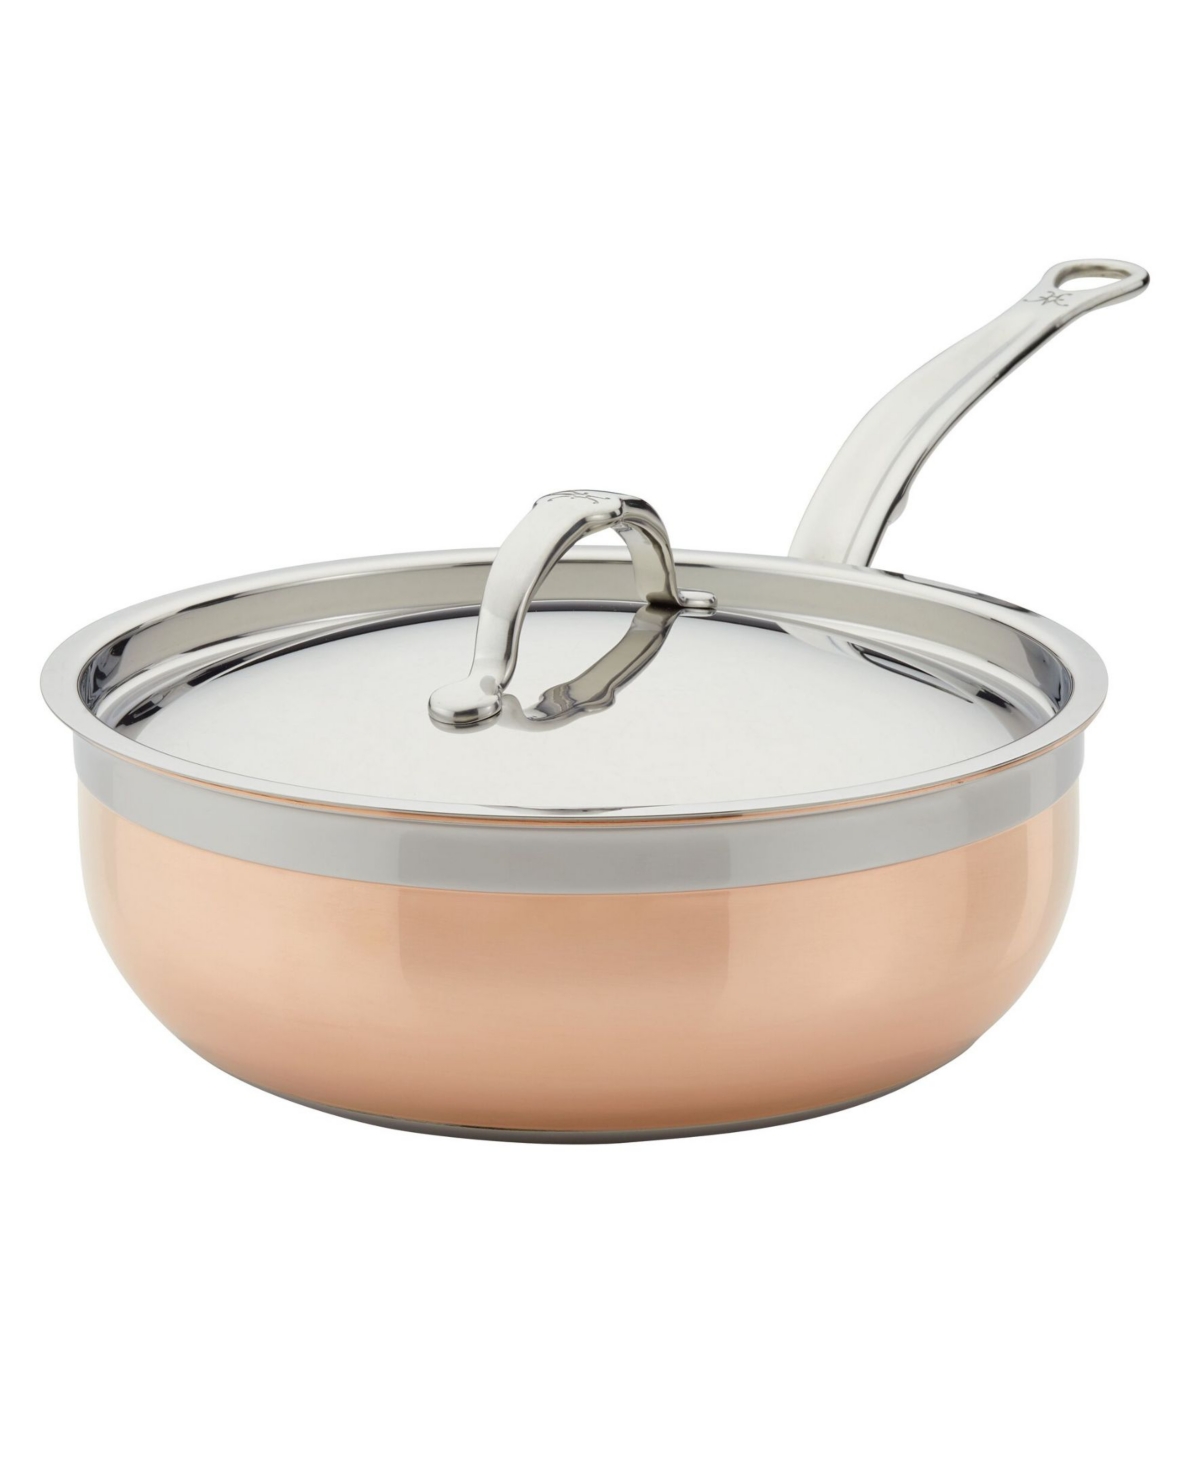 Shop Hestan Copperbond Copper Induction 3.5-quart Covered Essential Pan With Helper Handle